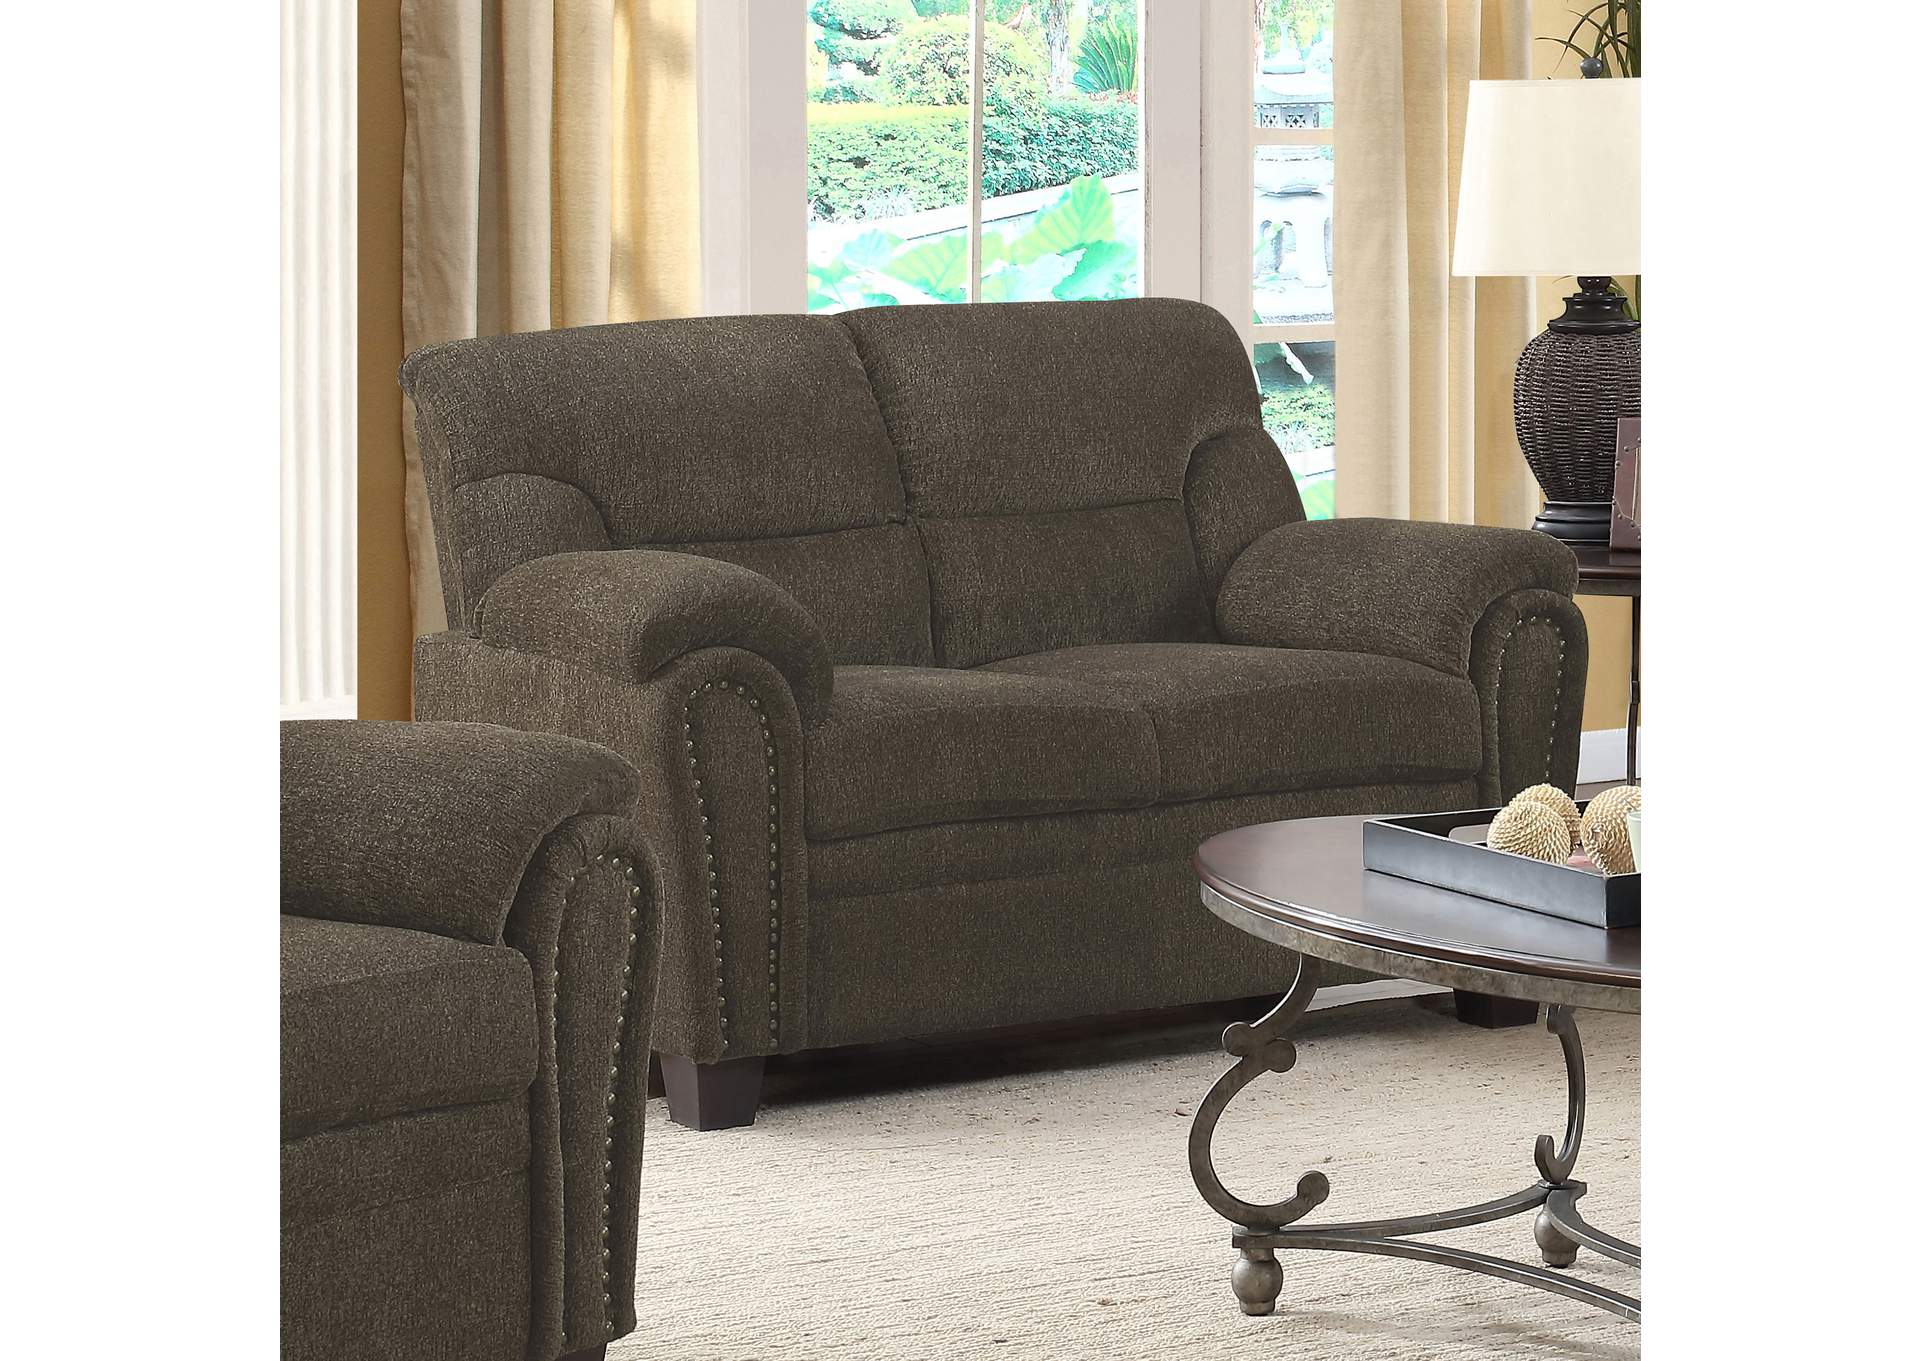 Clementine Upholstered Loveseat with Nailhead Trim Brown,Coaster Furniture